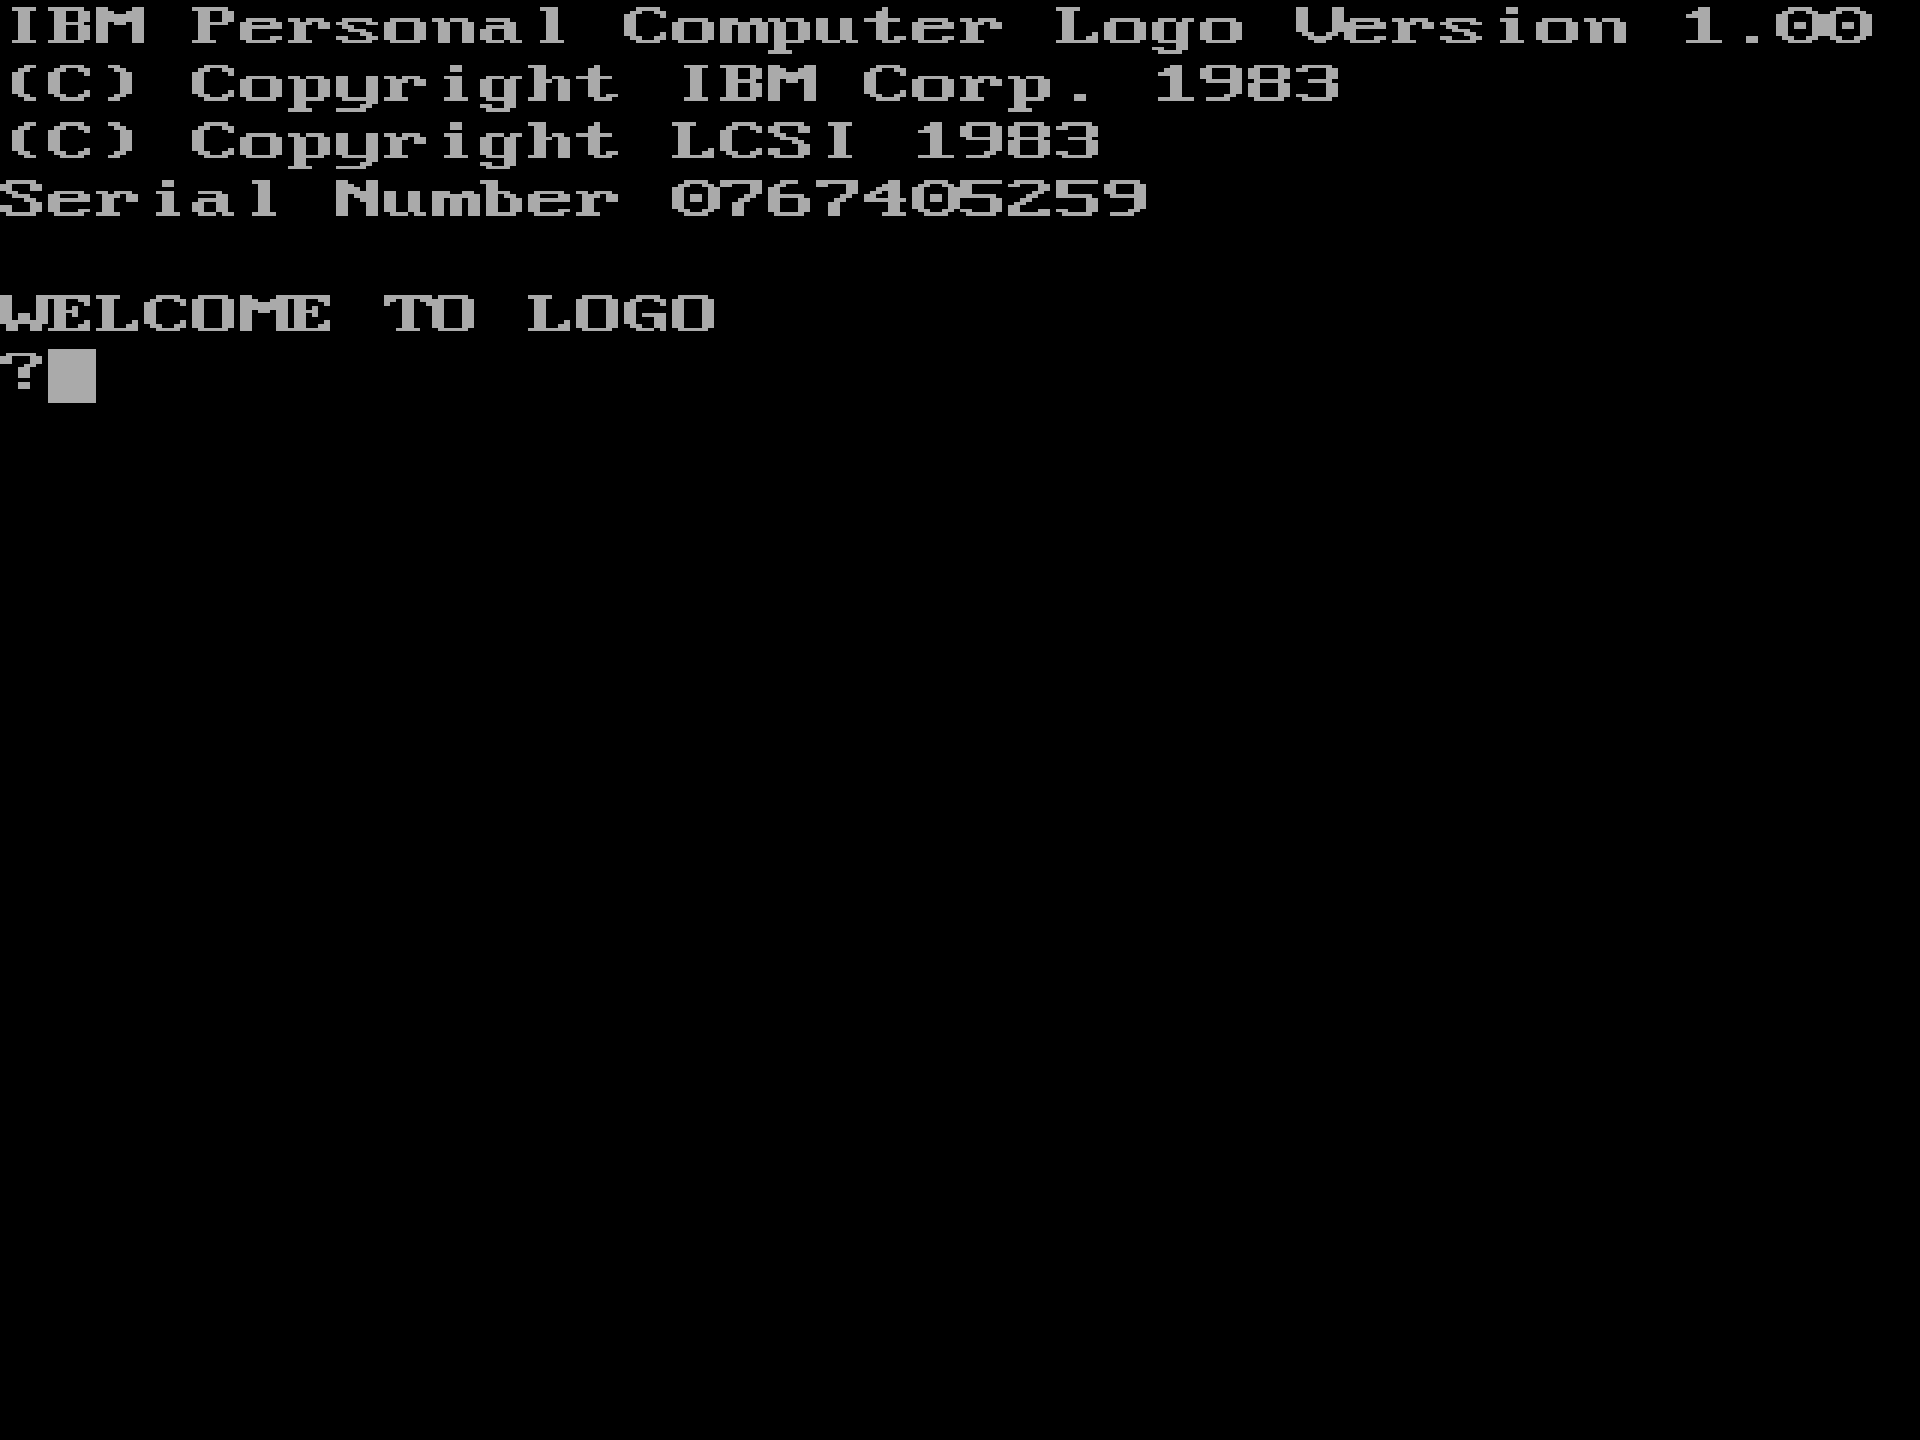 A screenshot of IBM Personal Computer Logo with copyright notices of IBM and LCSI, welcome message, and question mark prompt